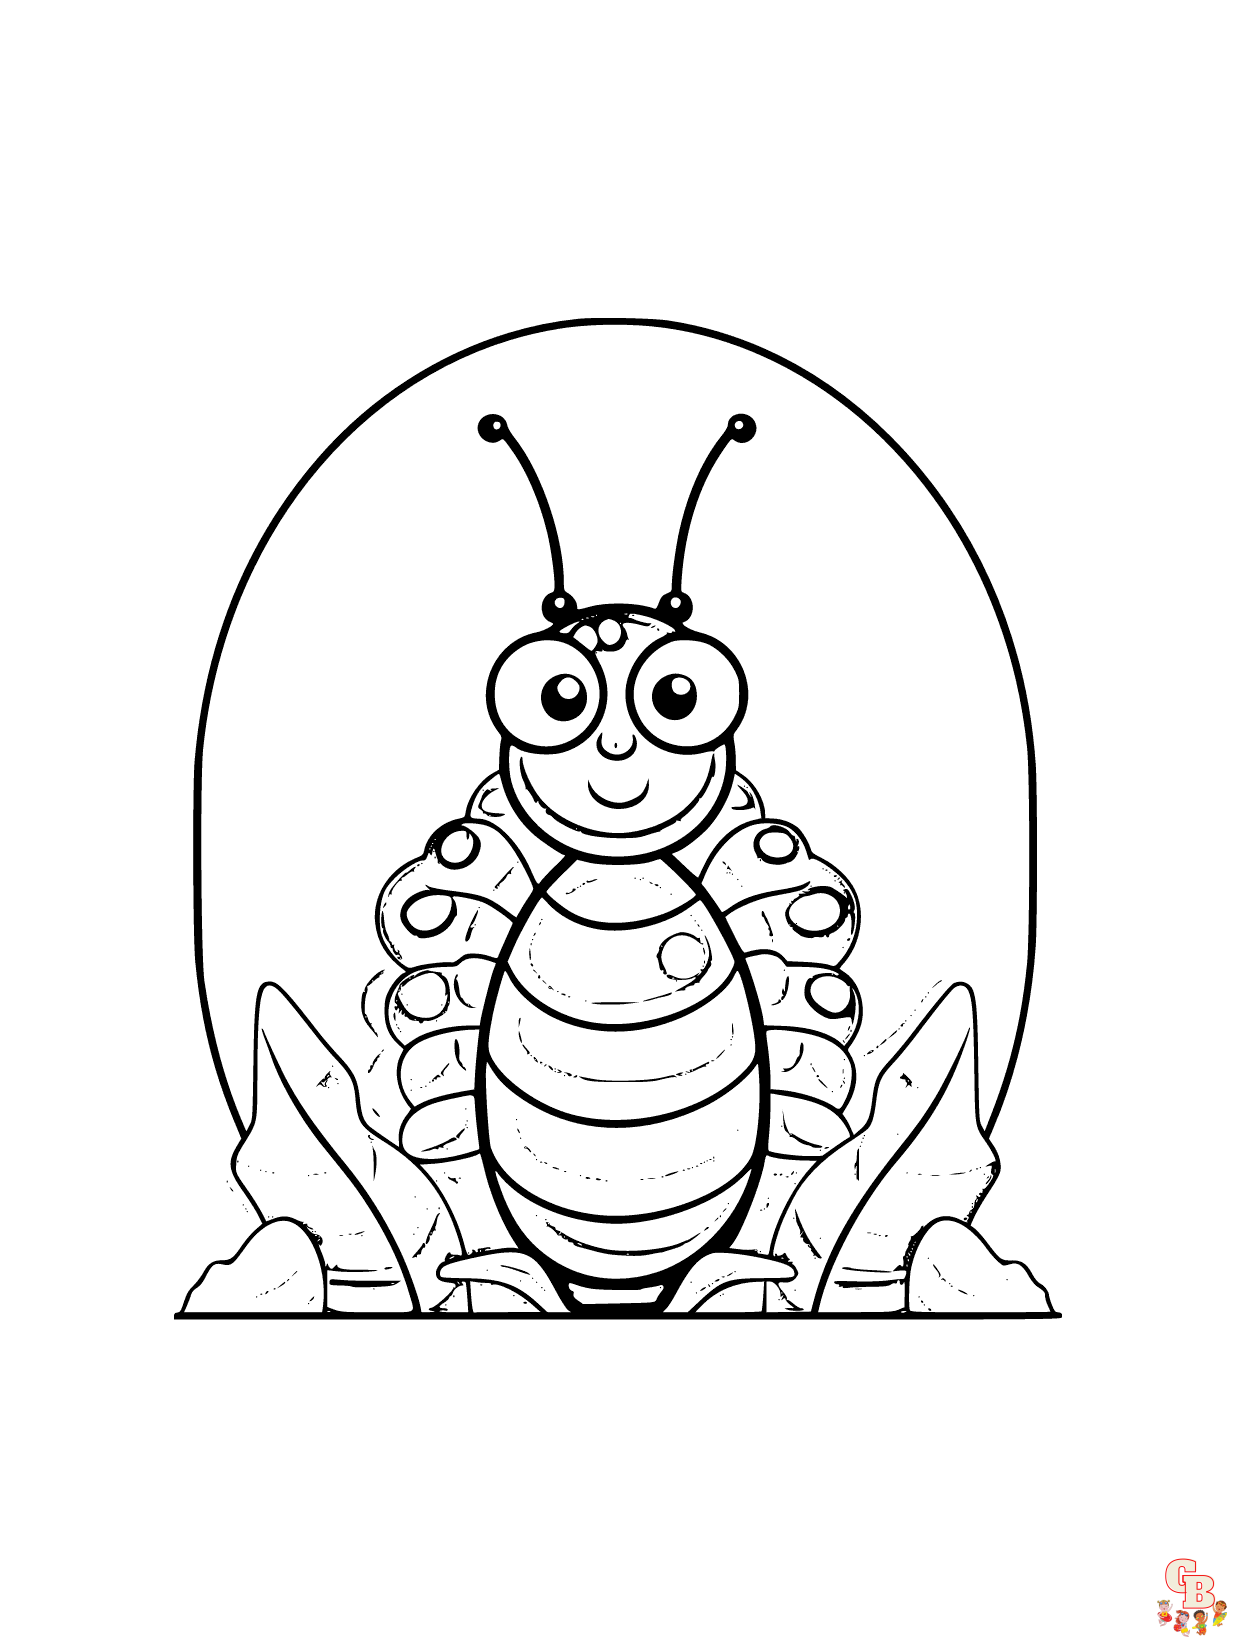 Free Caterpillar coloring pages for kids